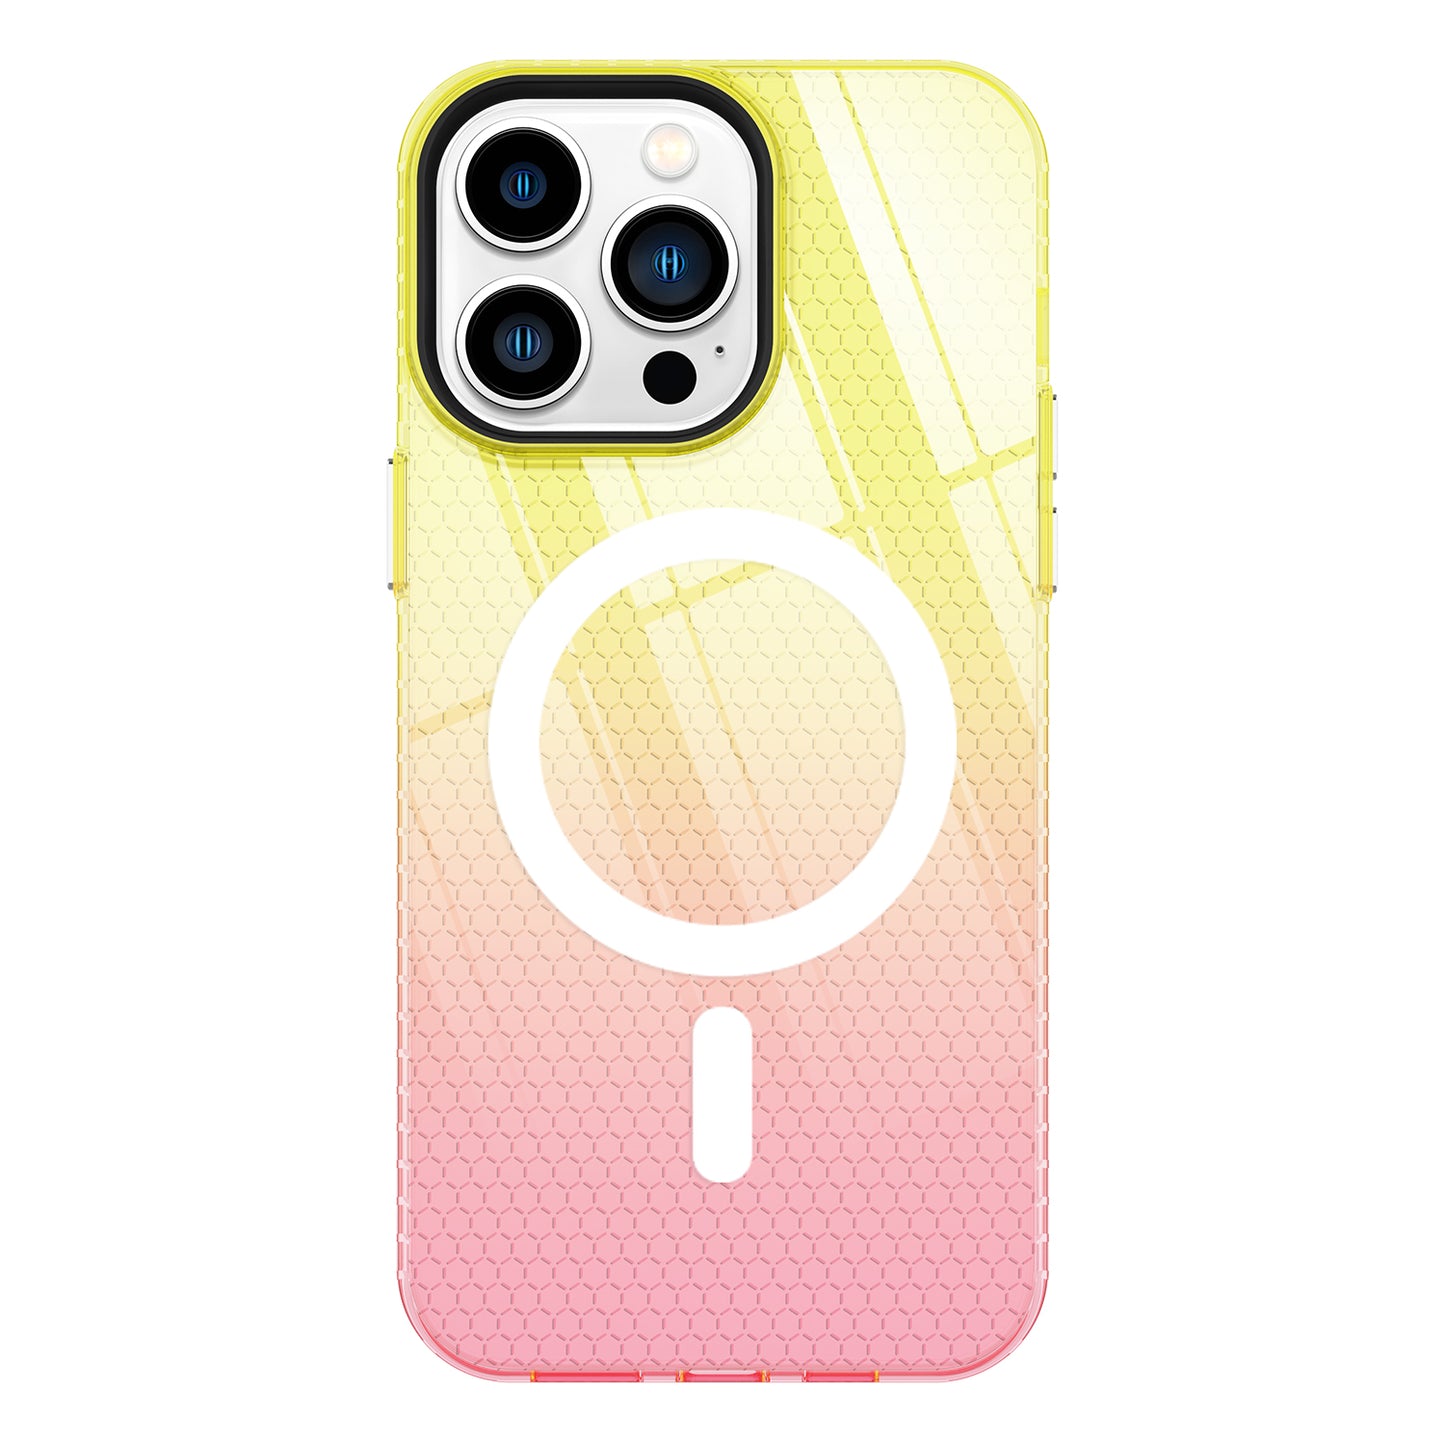 New Products colorful Wireless Charging Clear Magnetic Phone Case Cover For Iphone 14 Pro Max shockproof